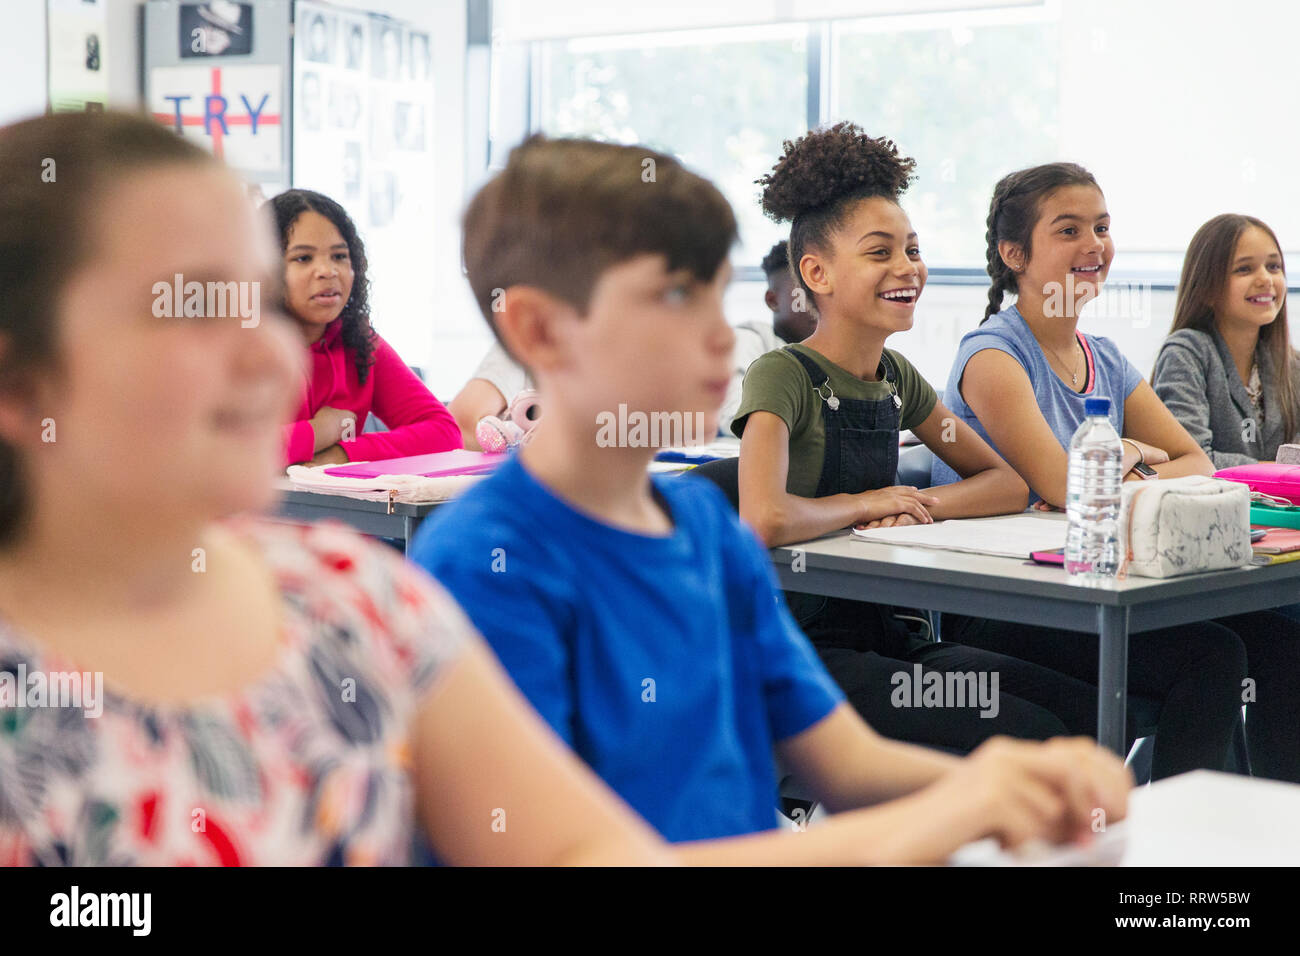 Smiling junior high school students listening in classroom lesson Stock Photo